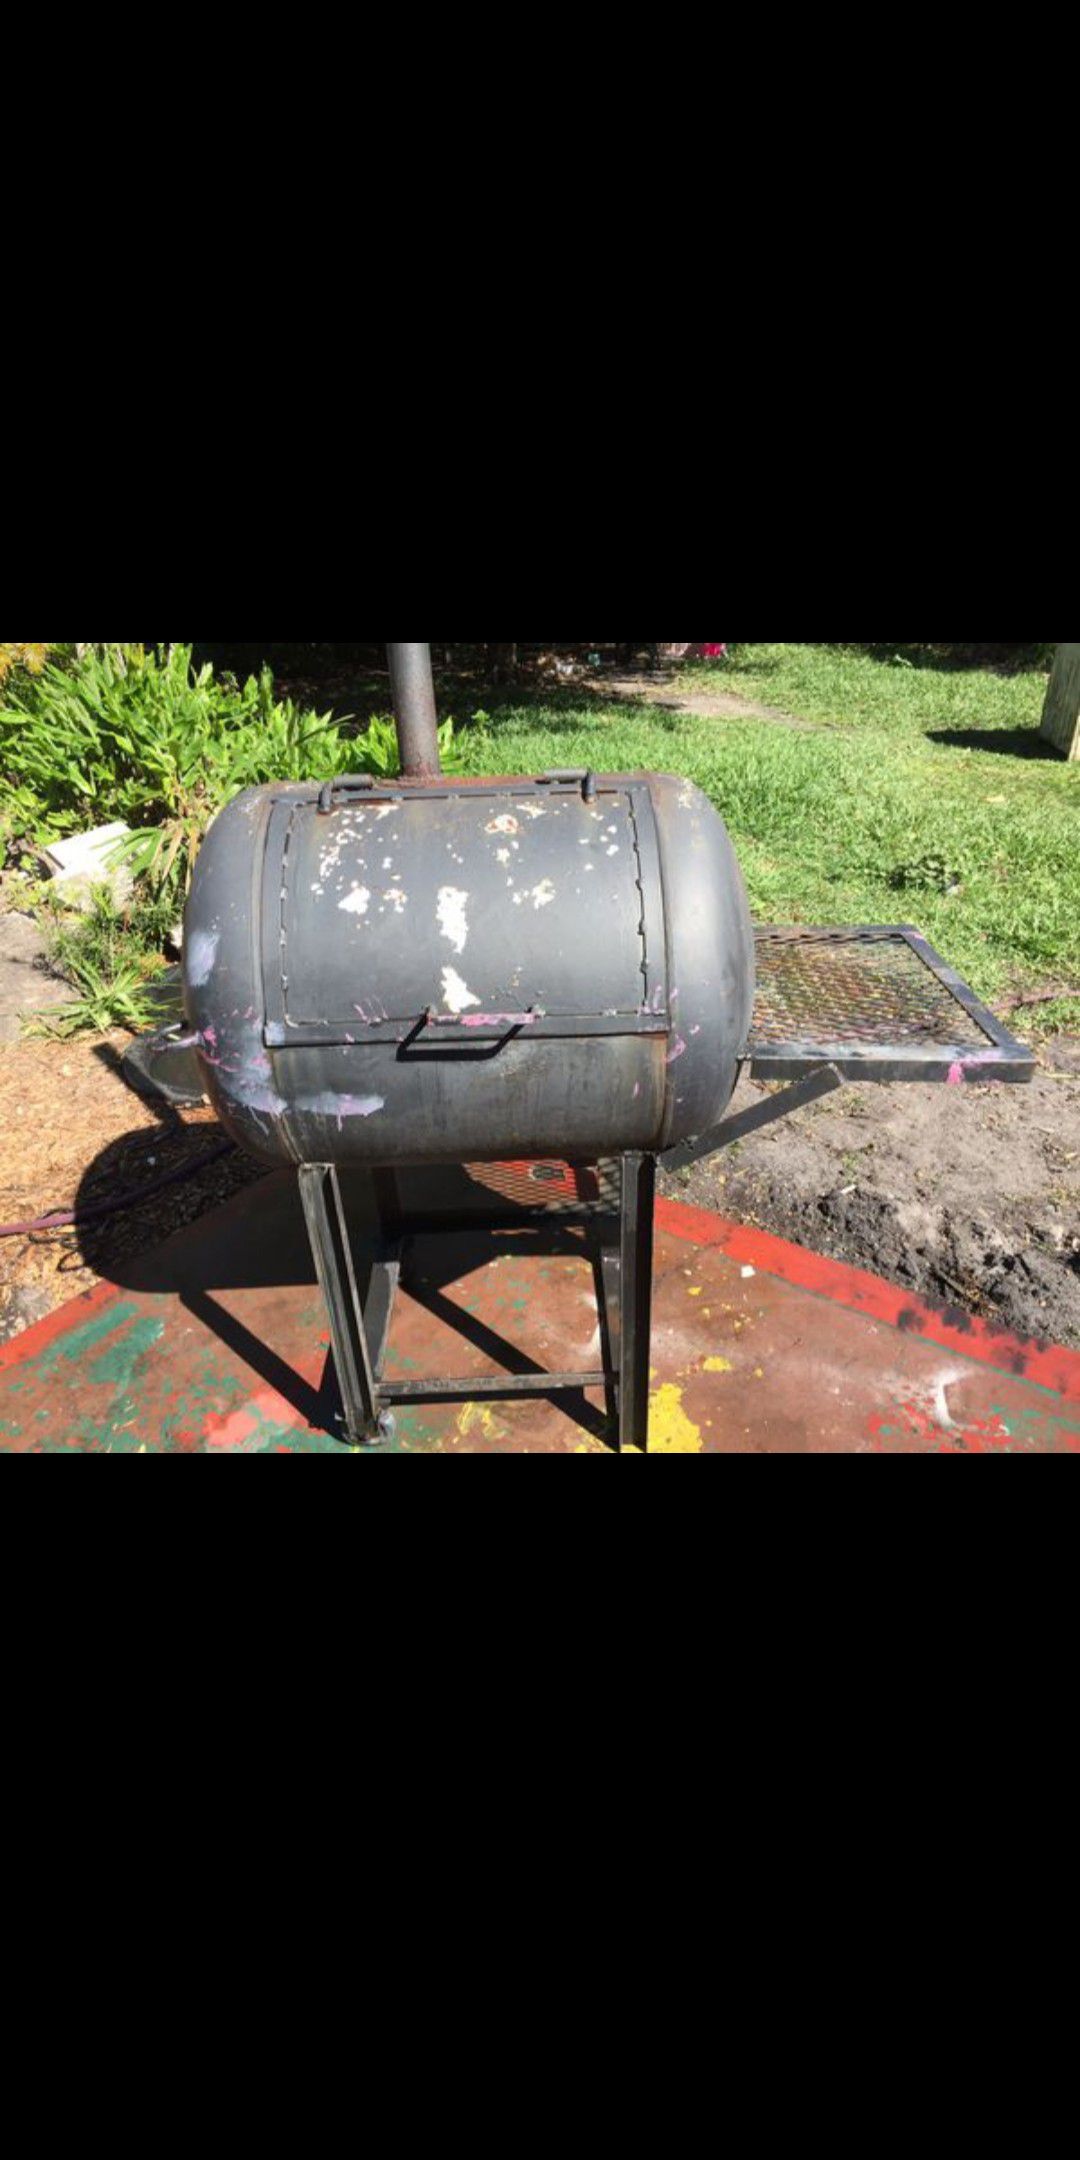 BBQ barbecue grill smoker